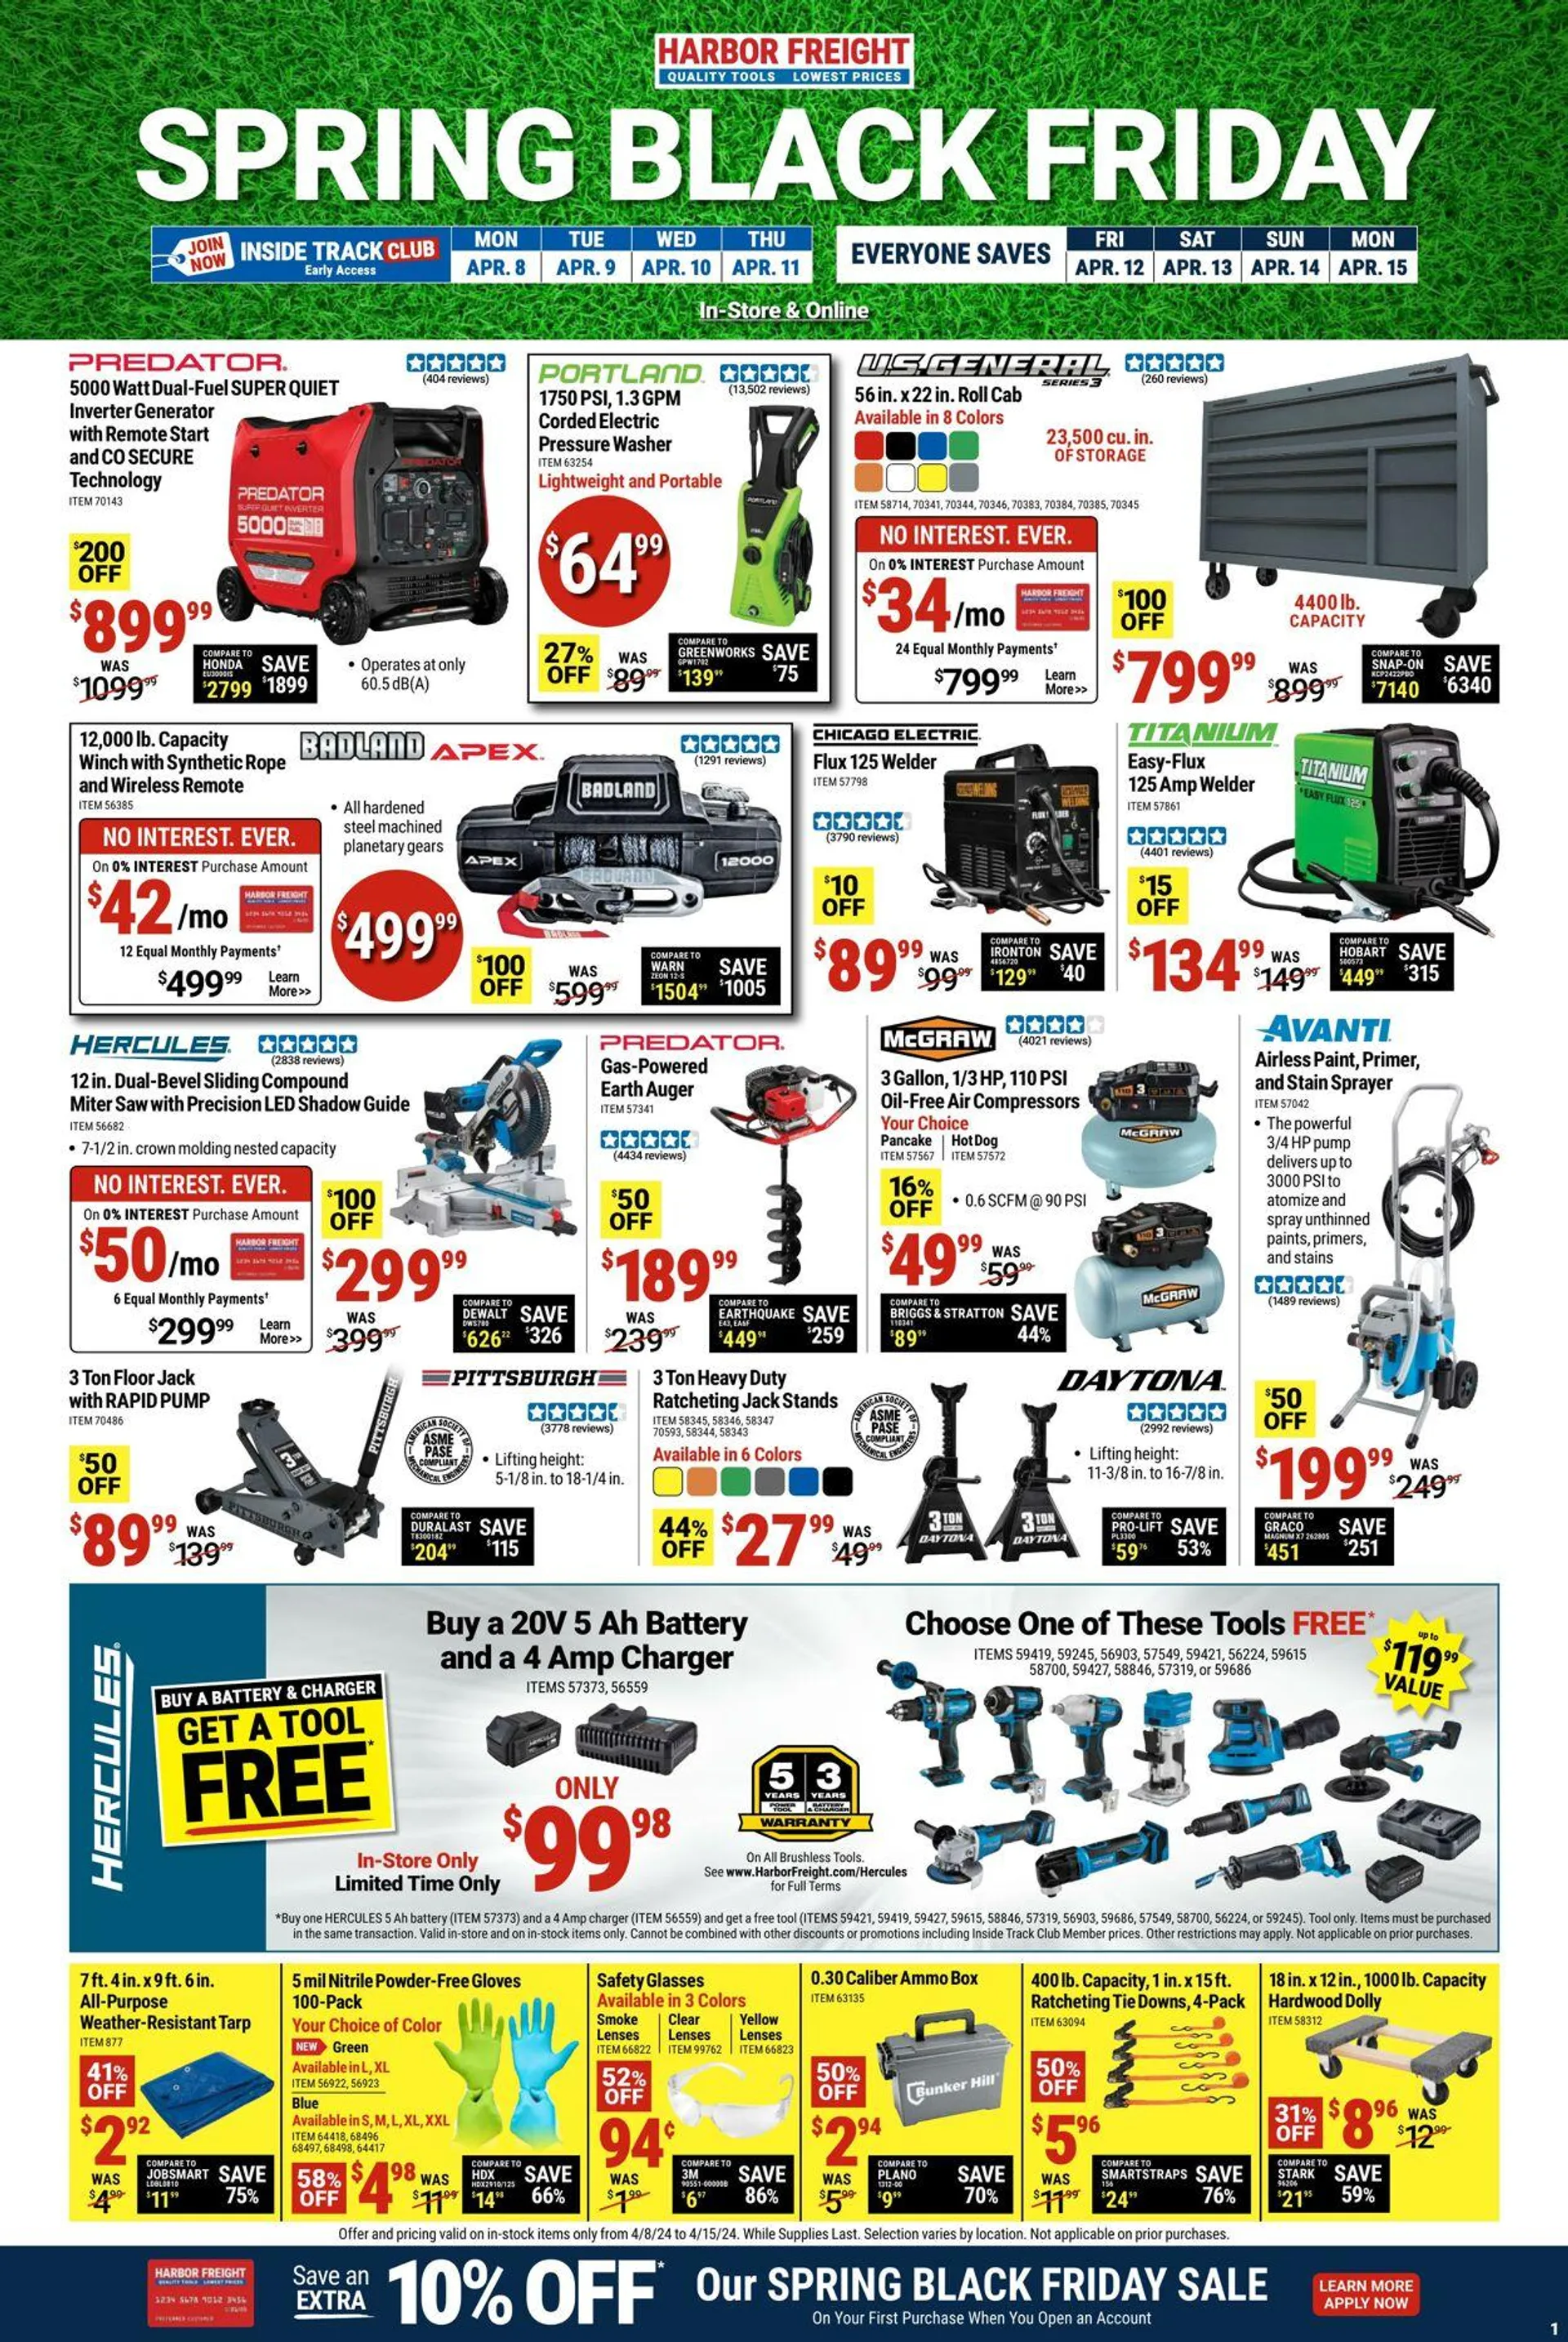 Harbor Freight Current weekly ad - 1